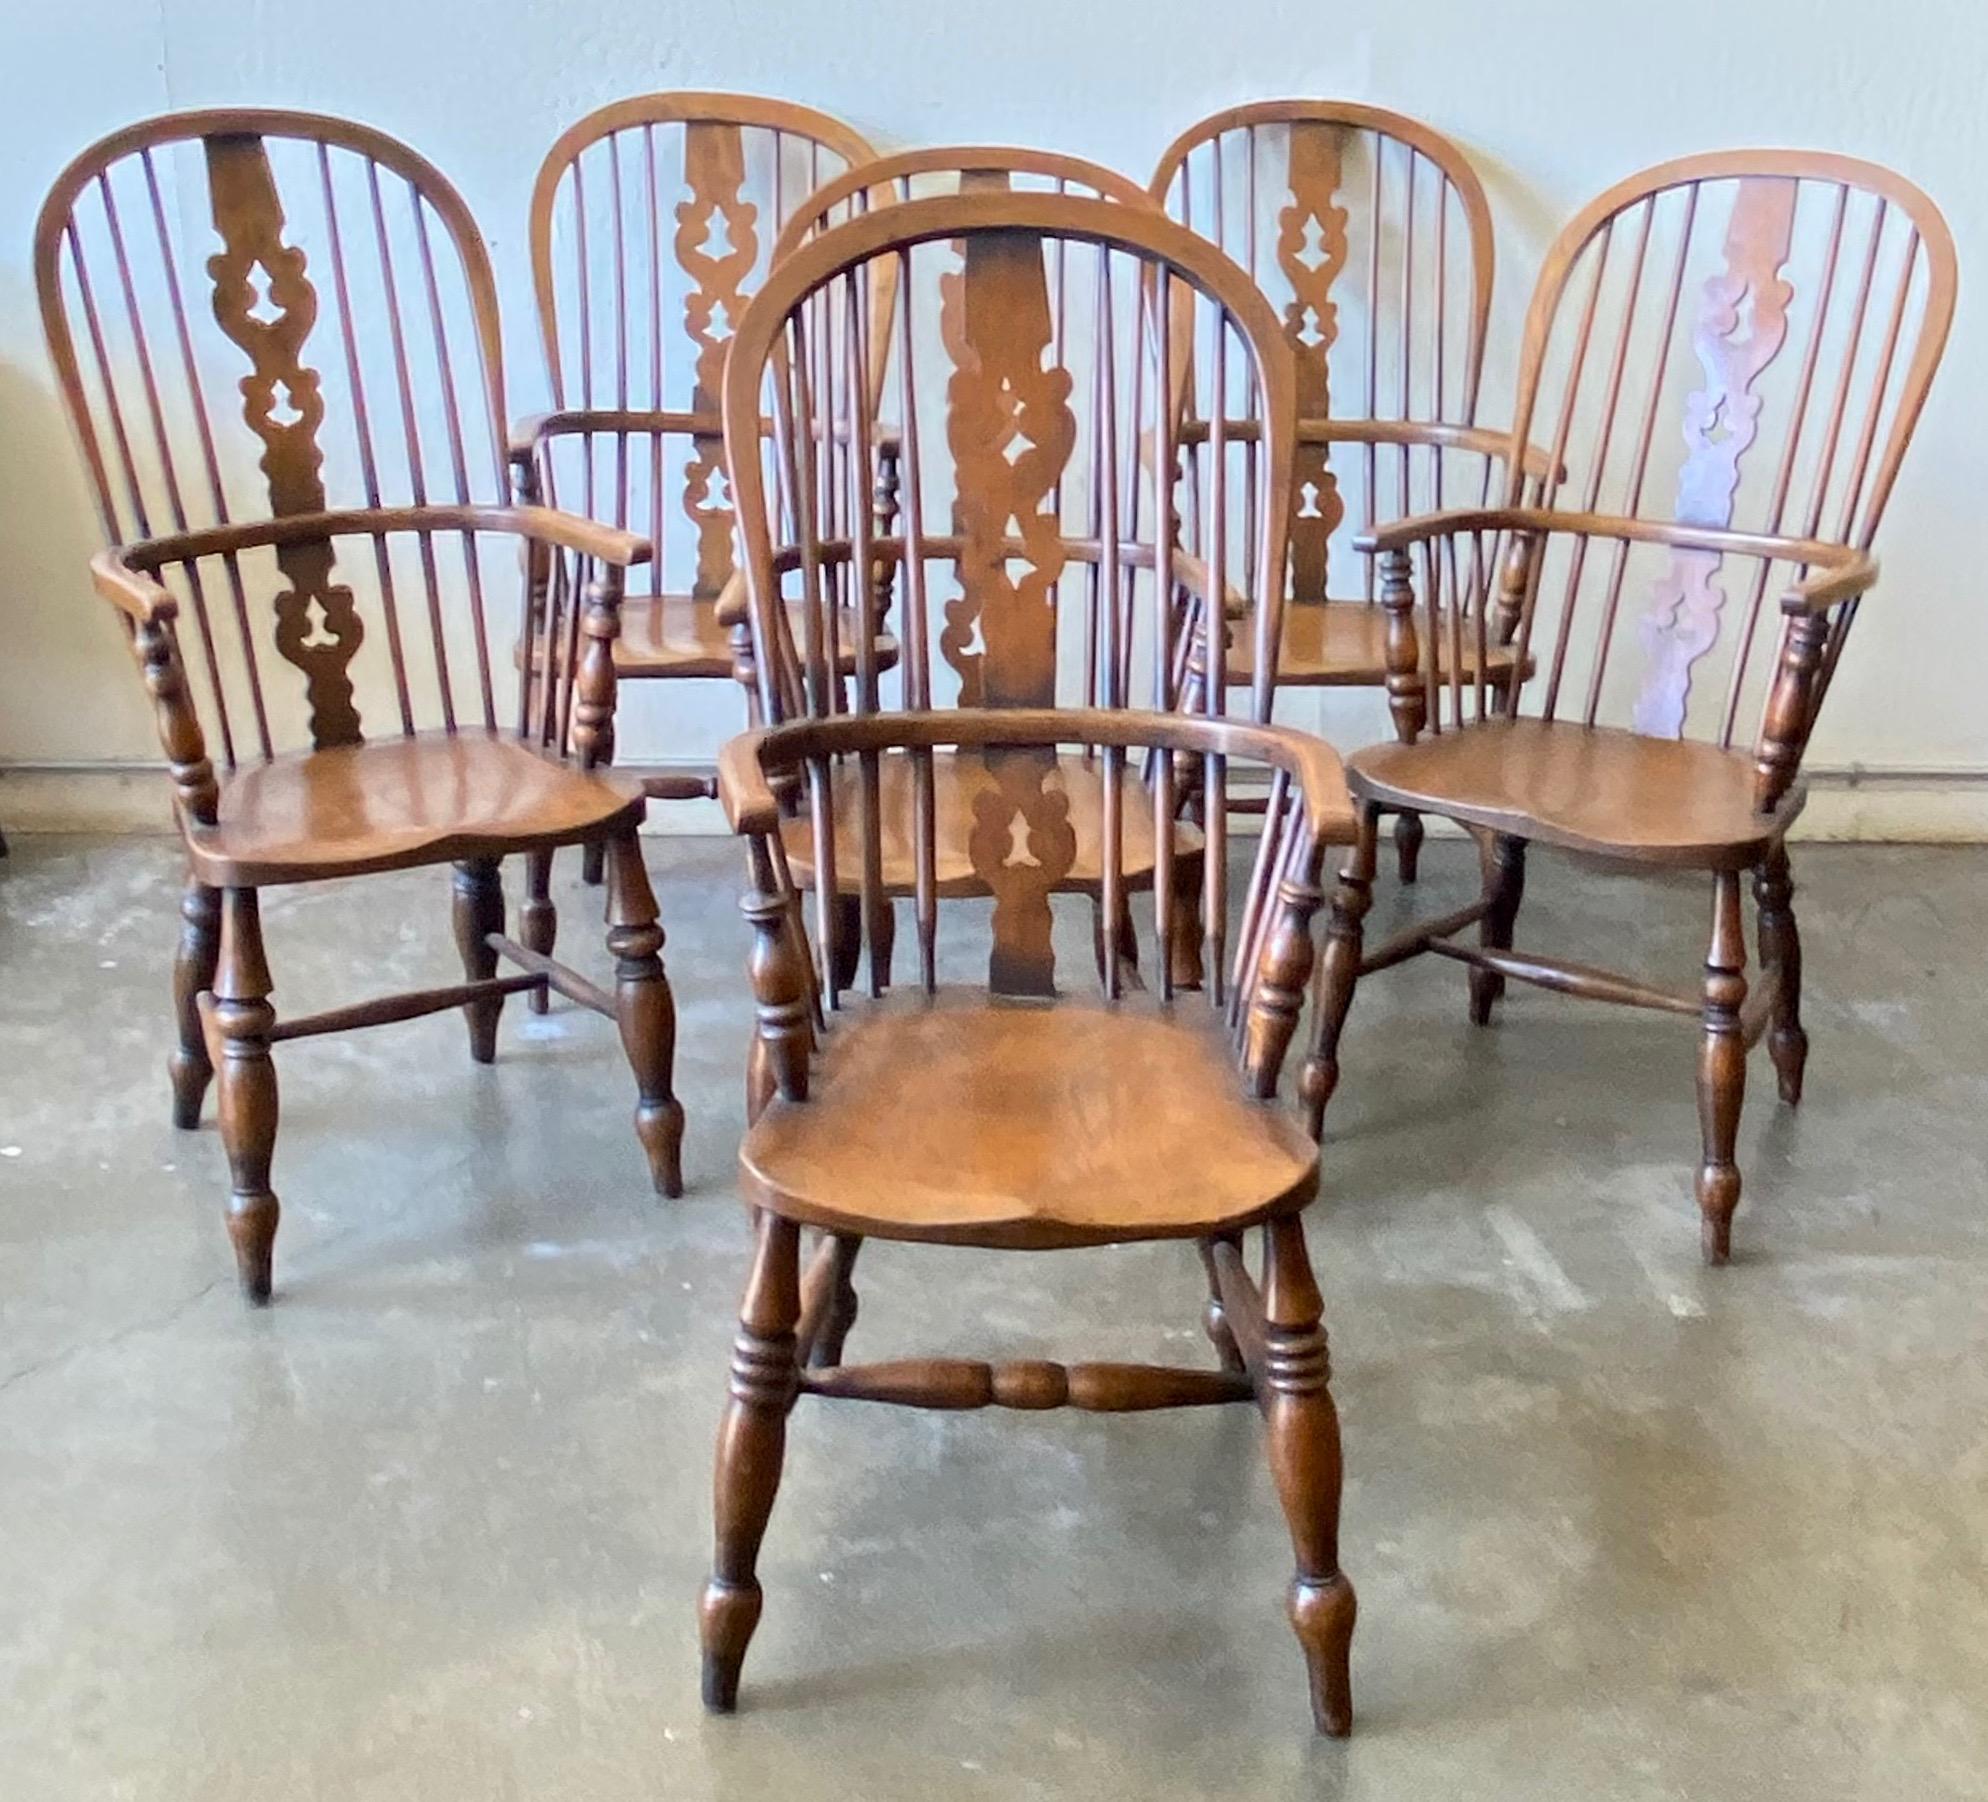 An excellent well matched assembled set of six Windsor chairs in original condition. Beautifully worn and aged oak and yew wood with a warm patina.
England, early 19th century.
The back splat design all match, some of the turnings are slightly